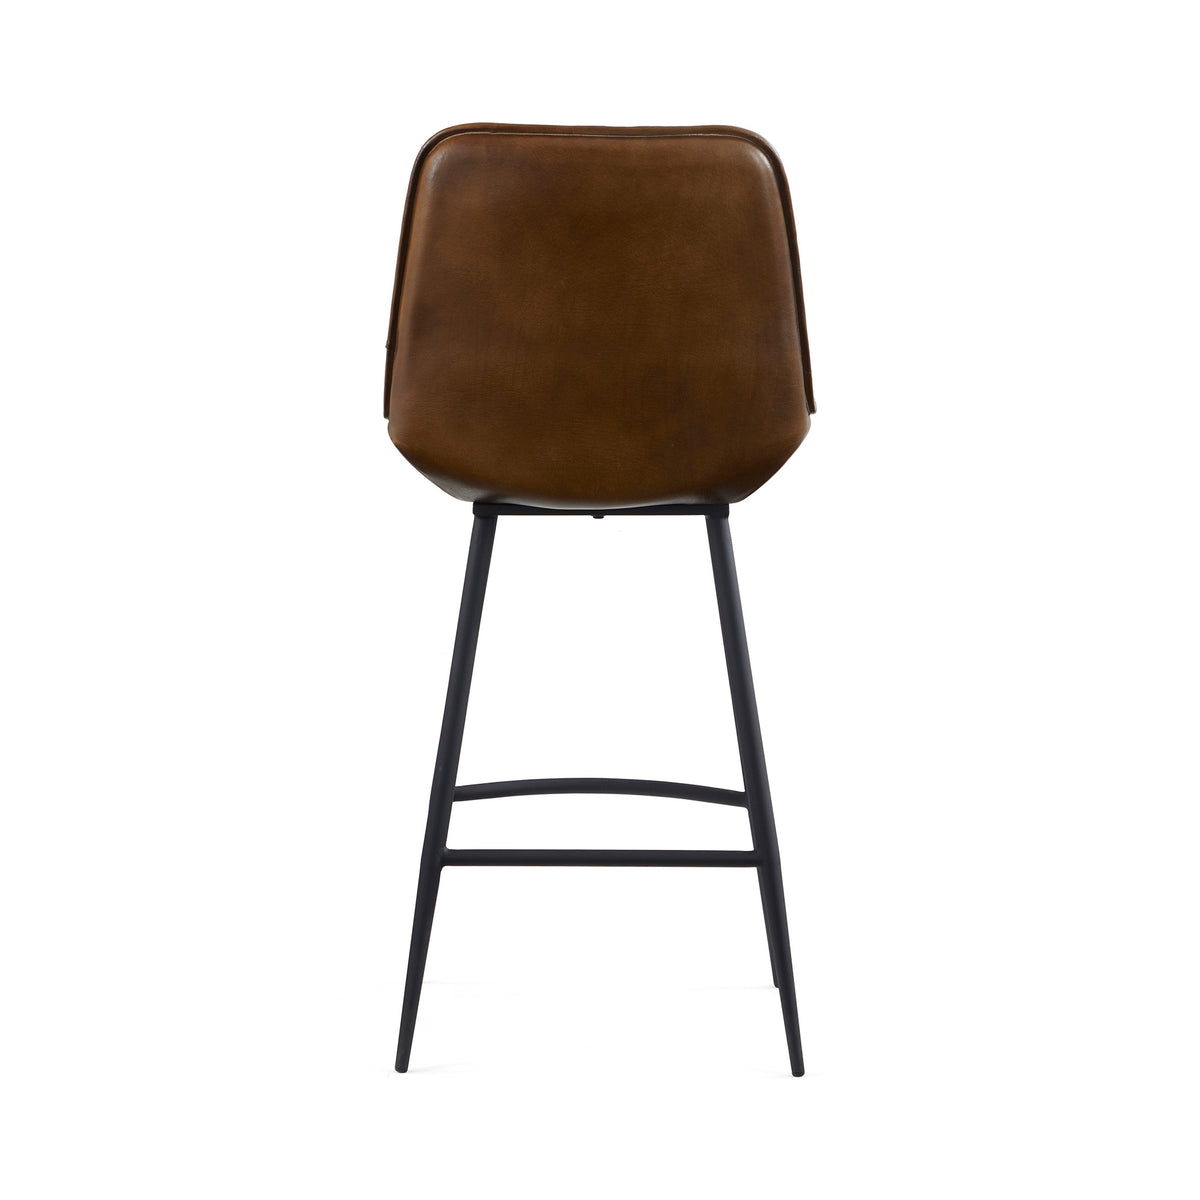 Rex Brown Quilted Leather Breakfast Bar Stool back view